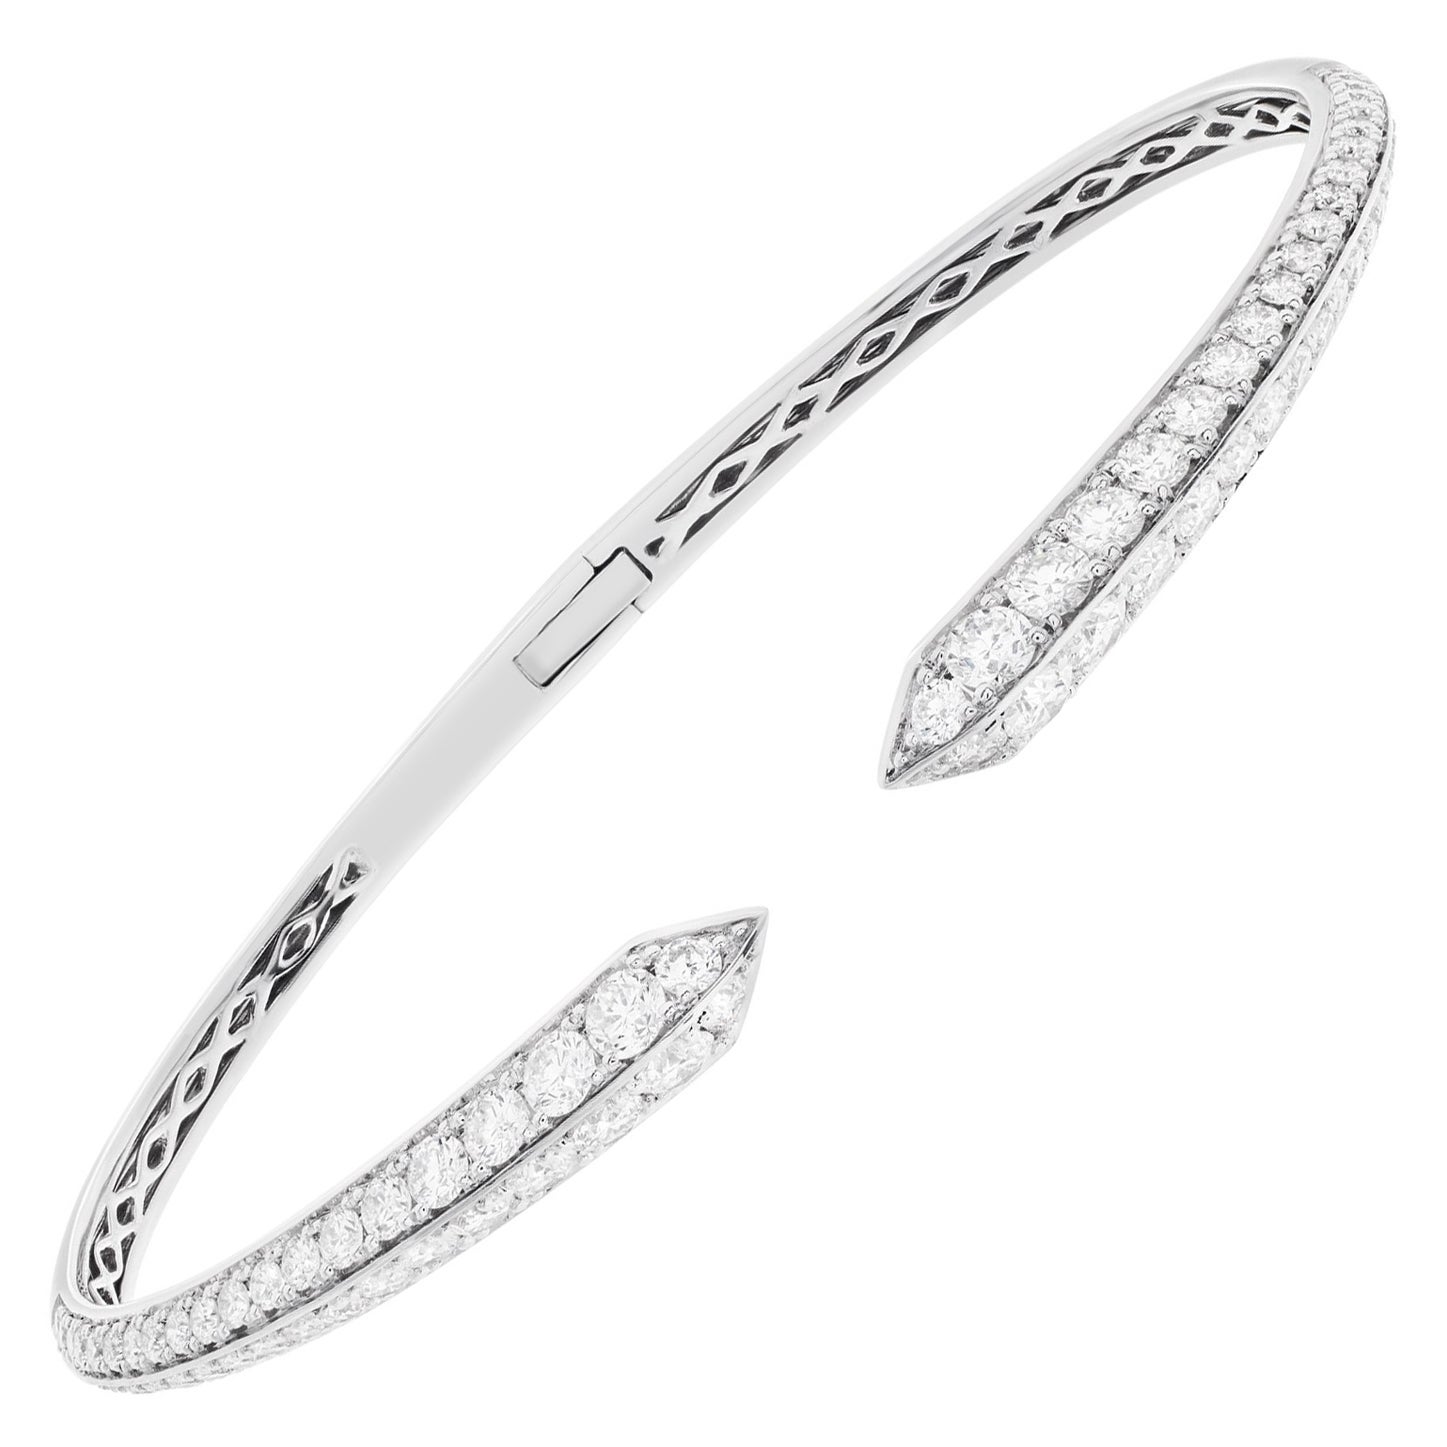 18k White Gold Bangle with 2.36 Carats in Diamonds, Fits Up to Wristt